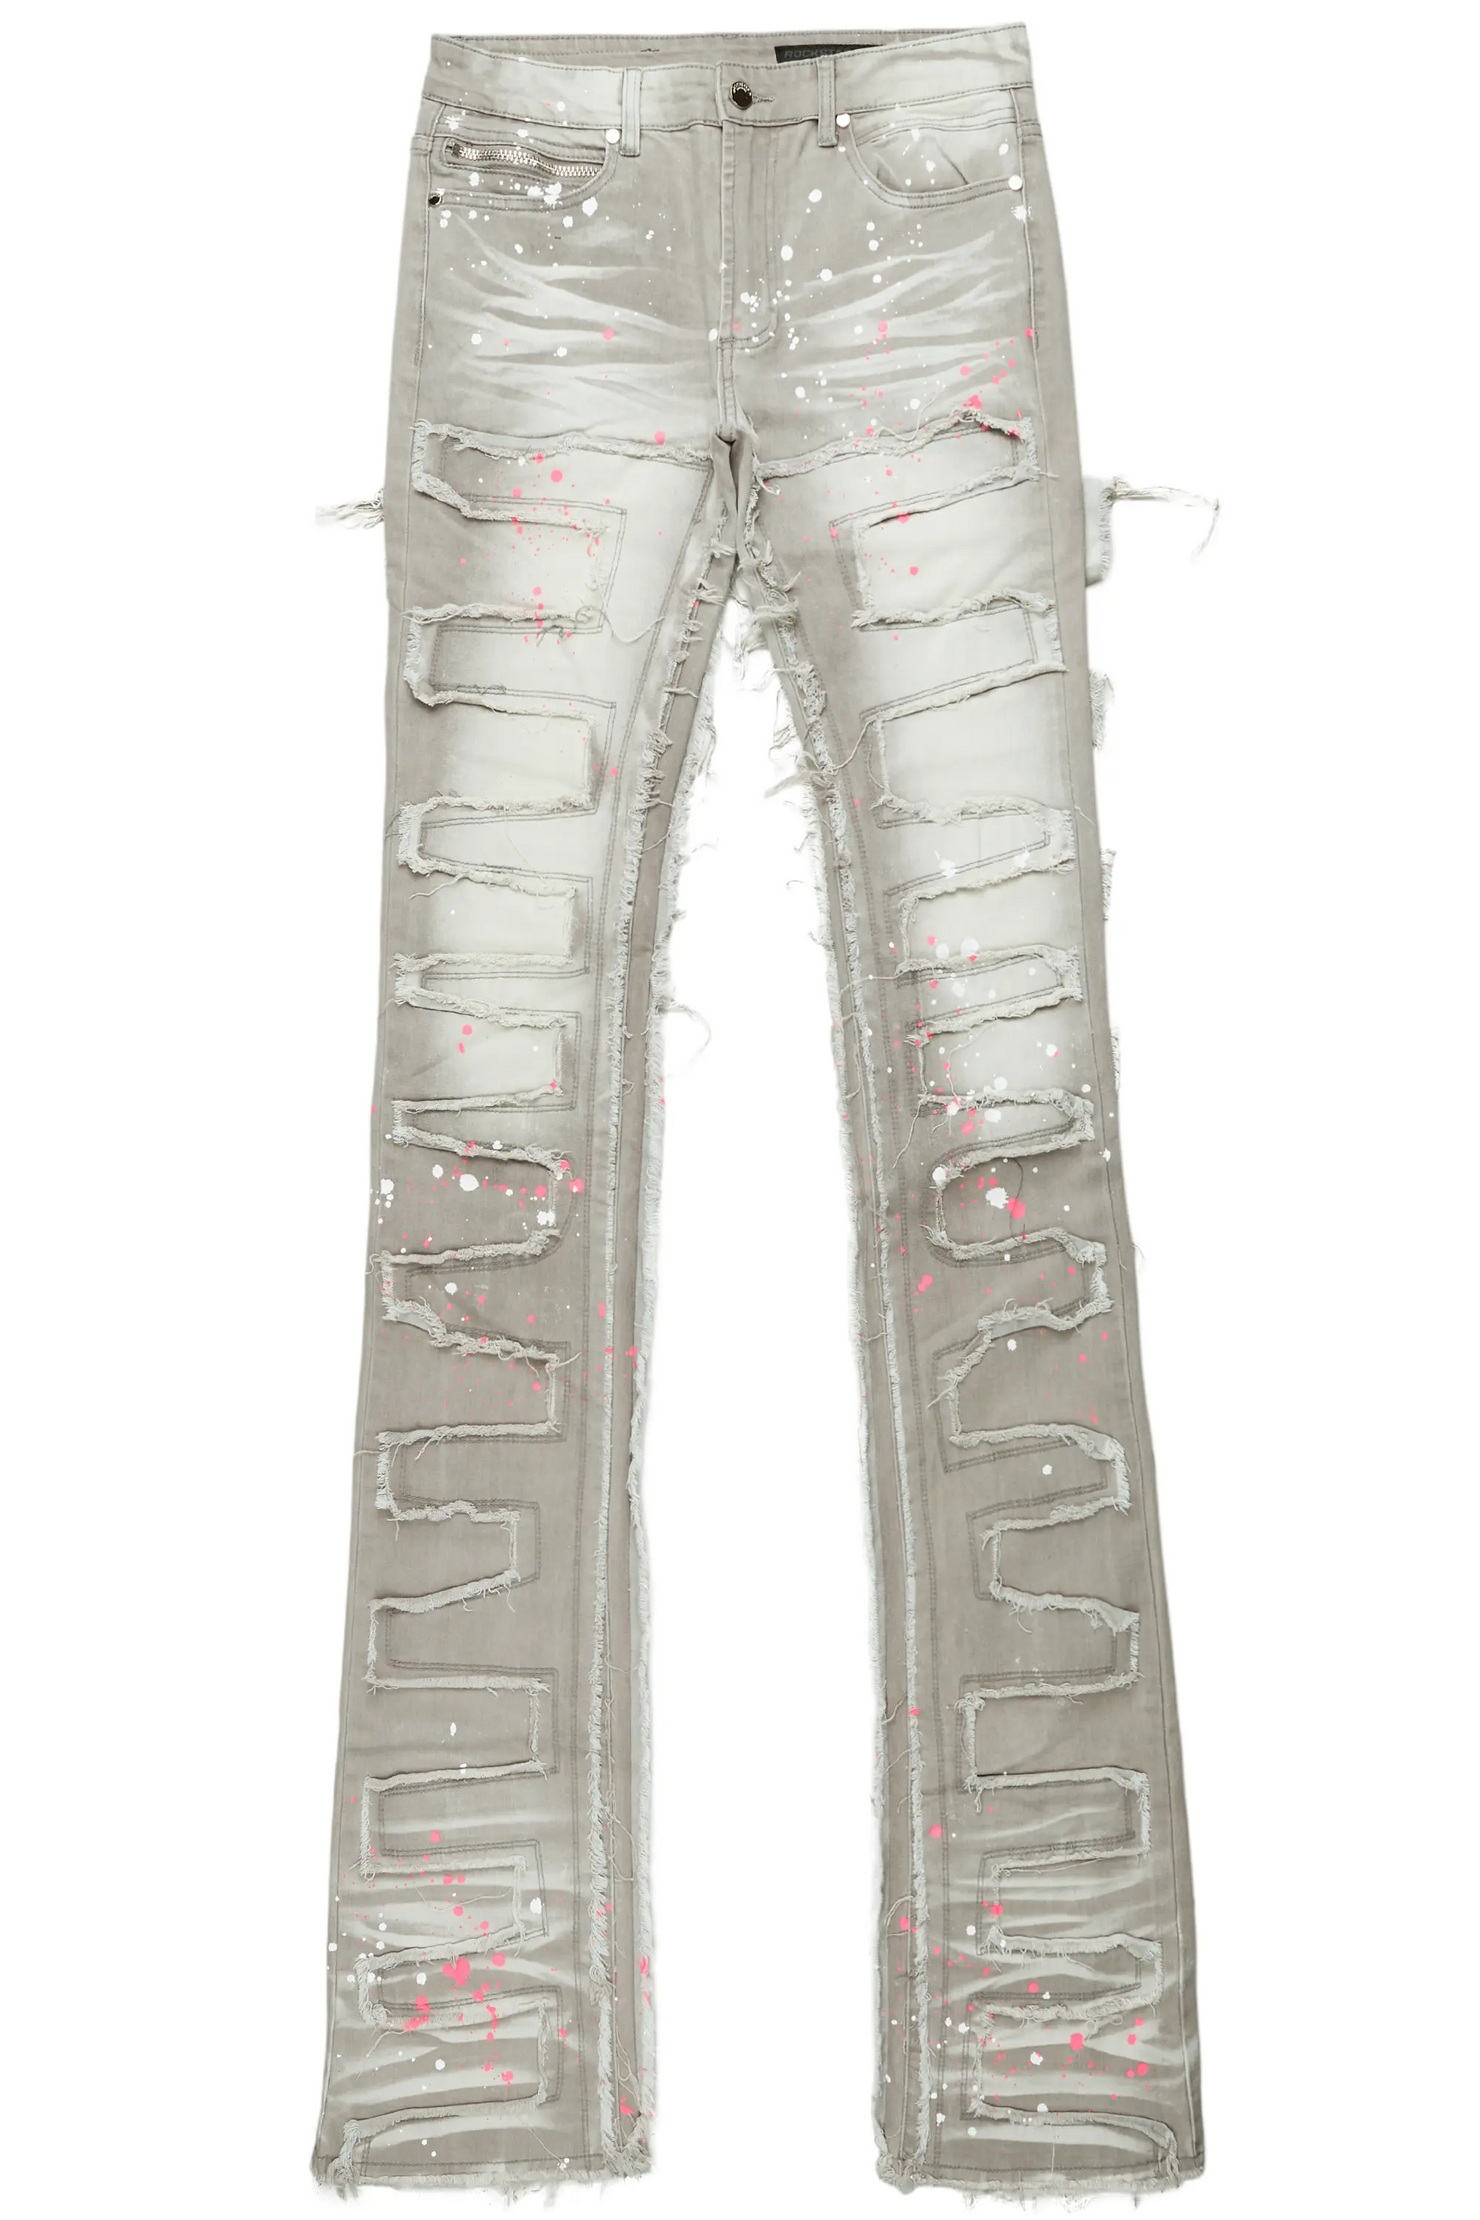 Niall Grey/Pink Painter Super Stacked Jean